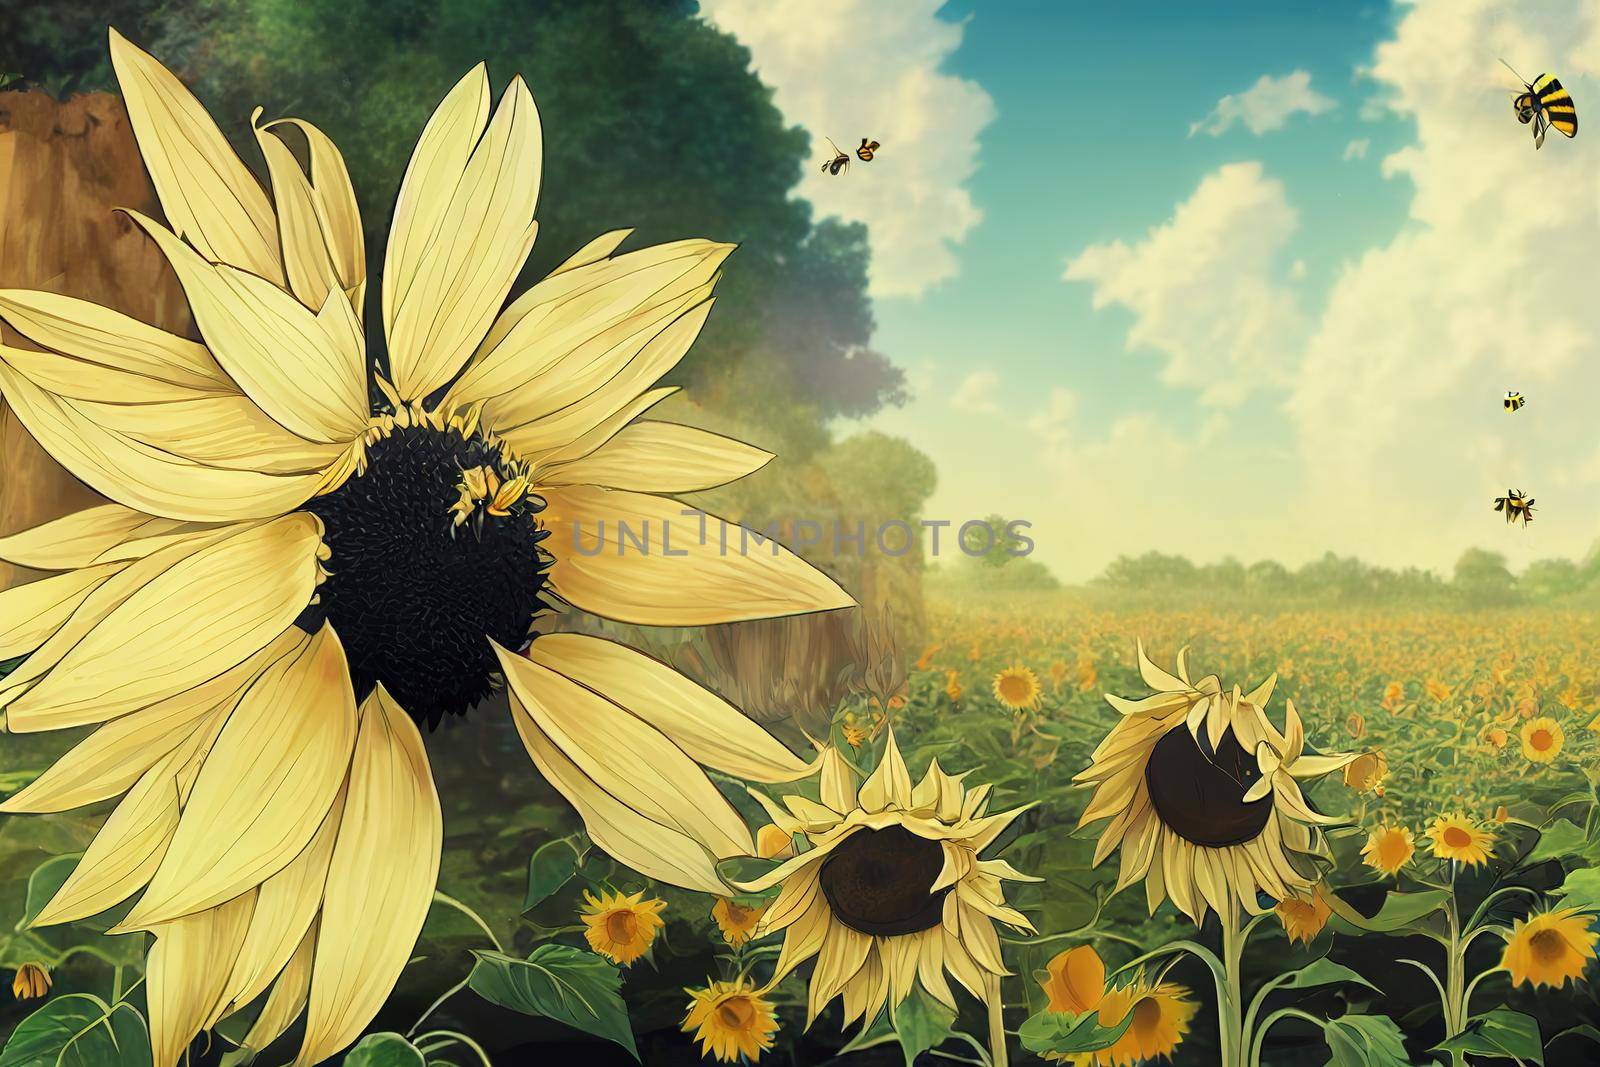 Bee over the sunflower. High quality 2d illustration